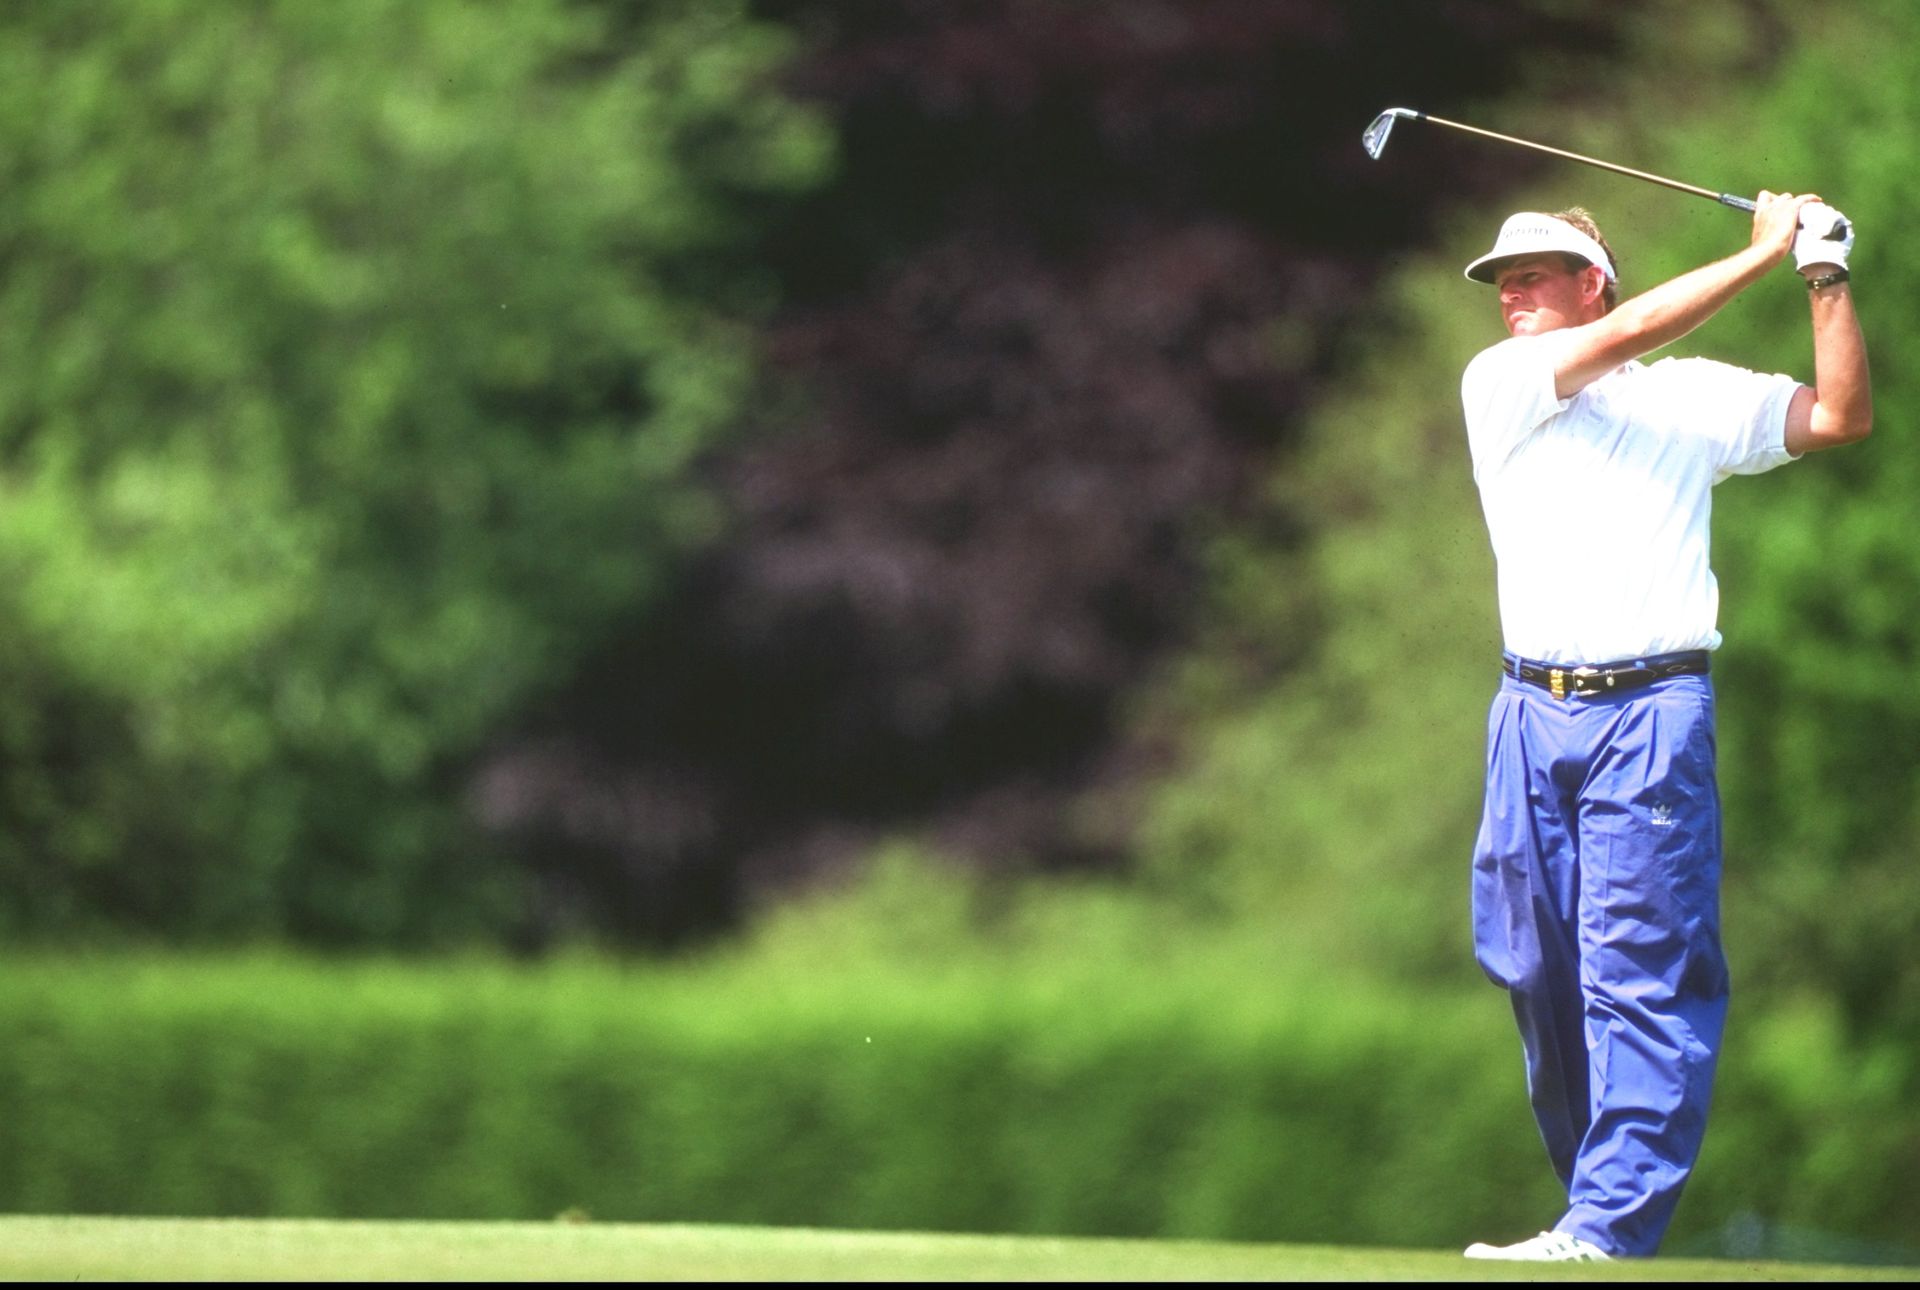 <p>                     To watch Sandy Lyle hit persimmon 3-woods on the range 30-odd years ago was a sight to behold. Of course, thoughts of that iron shot on the 18th hole at Augusta in 1988 immediately spring to mind when discussing the Scot; it was the perfect strike that set up his Masters victory. However, the 18-time European Tour (now DP World Tour) winner was pretty lethal with most clubs in the bag. Simply a wonderful ball striker.                   </p>